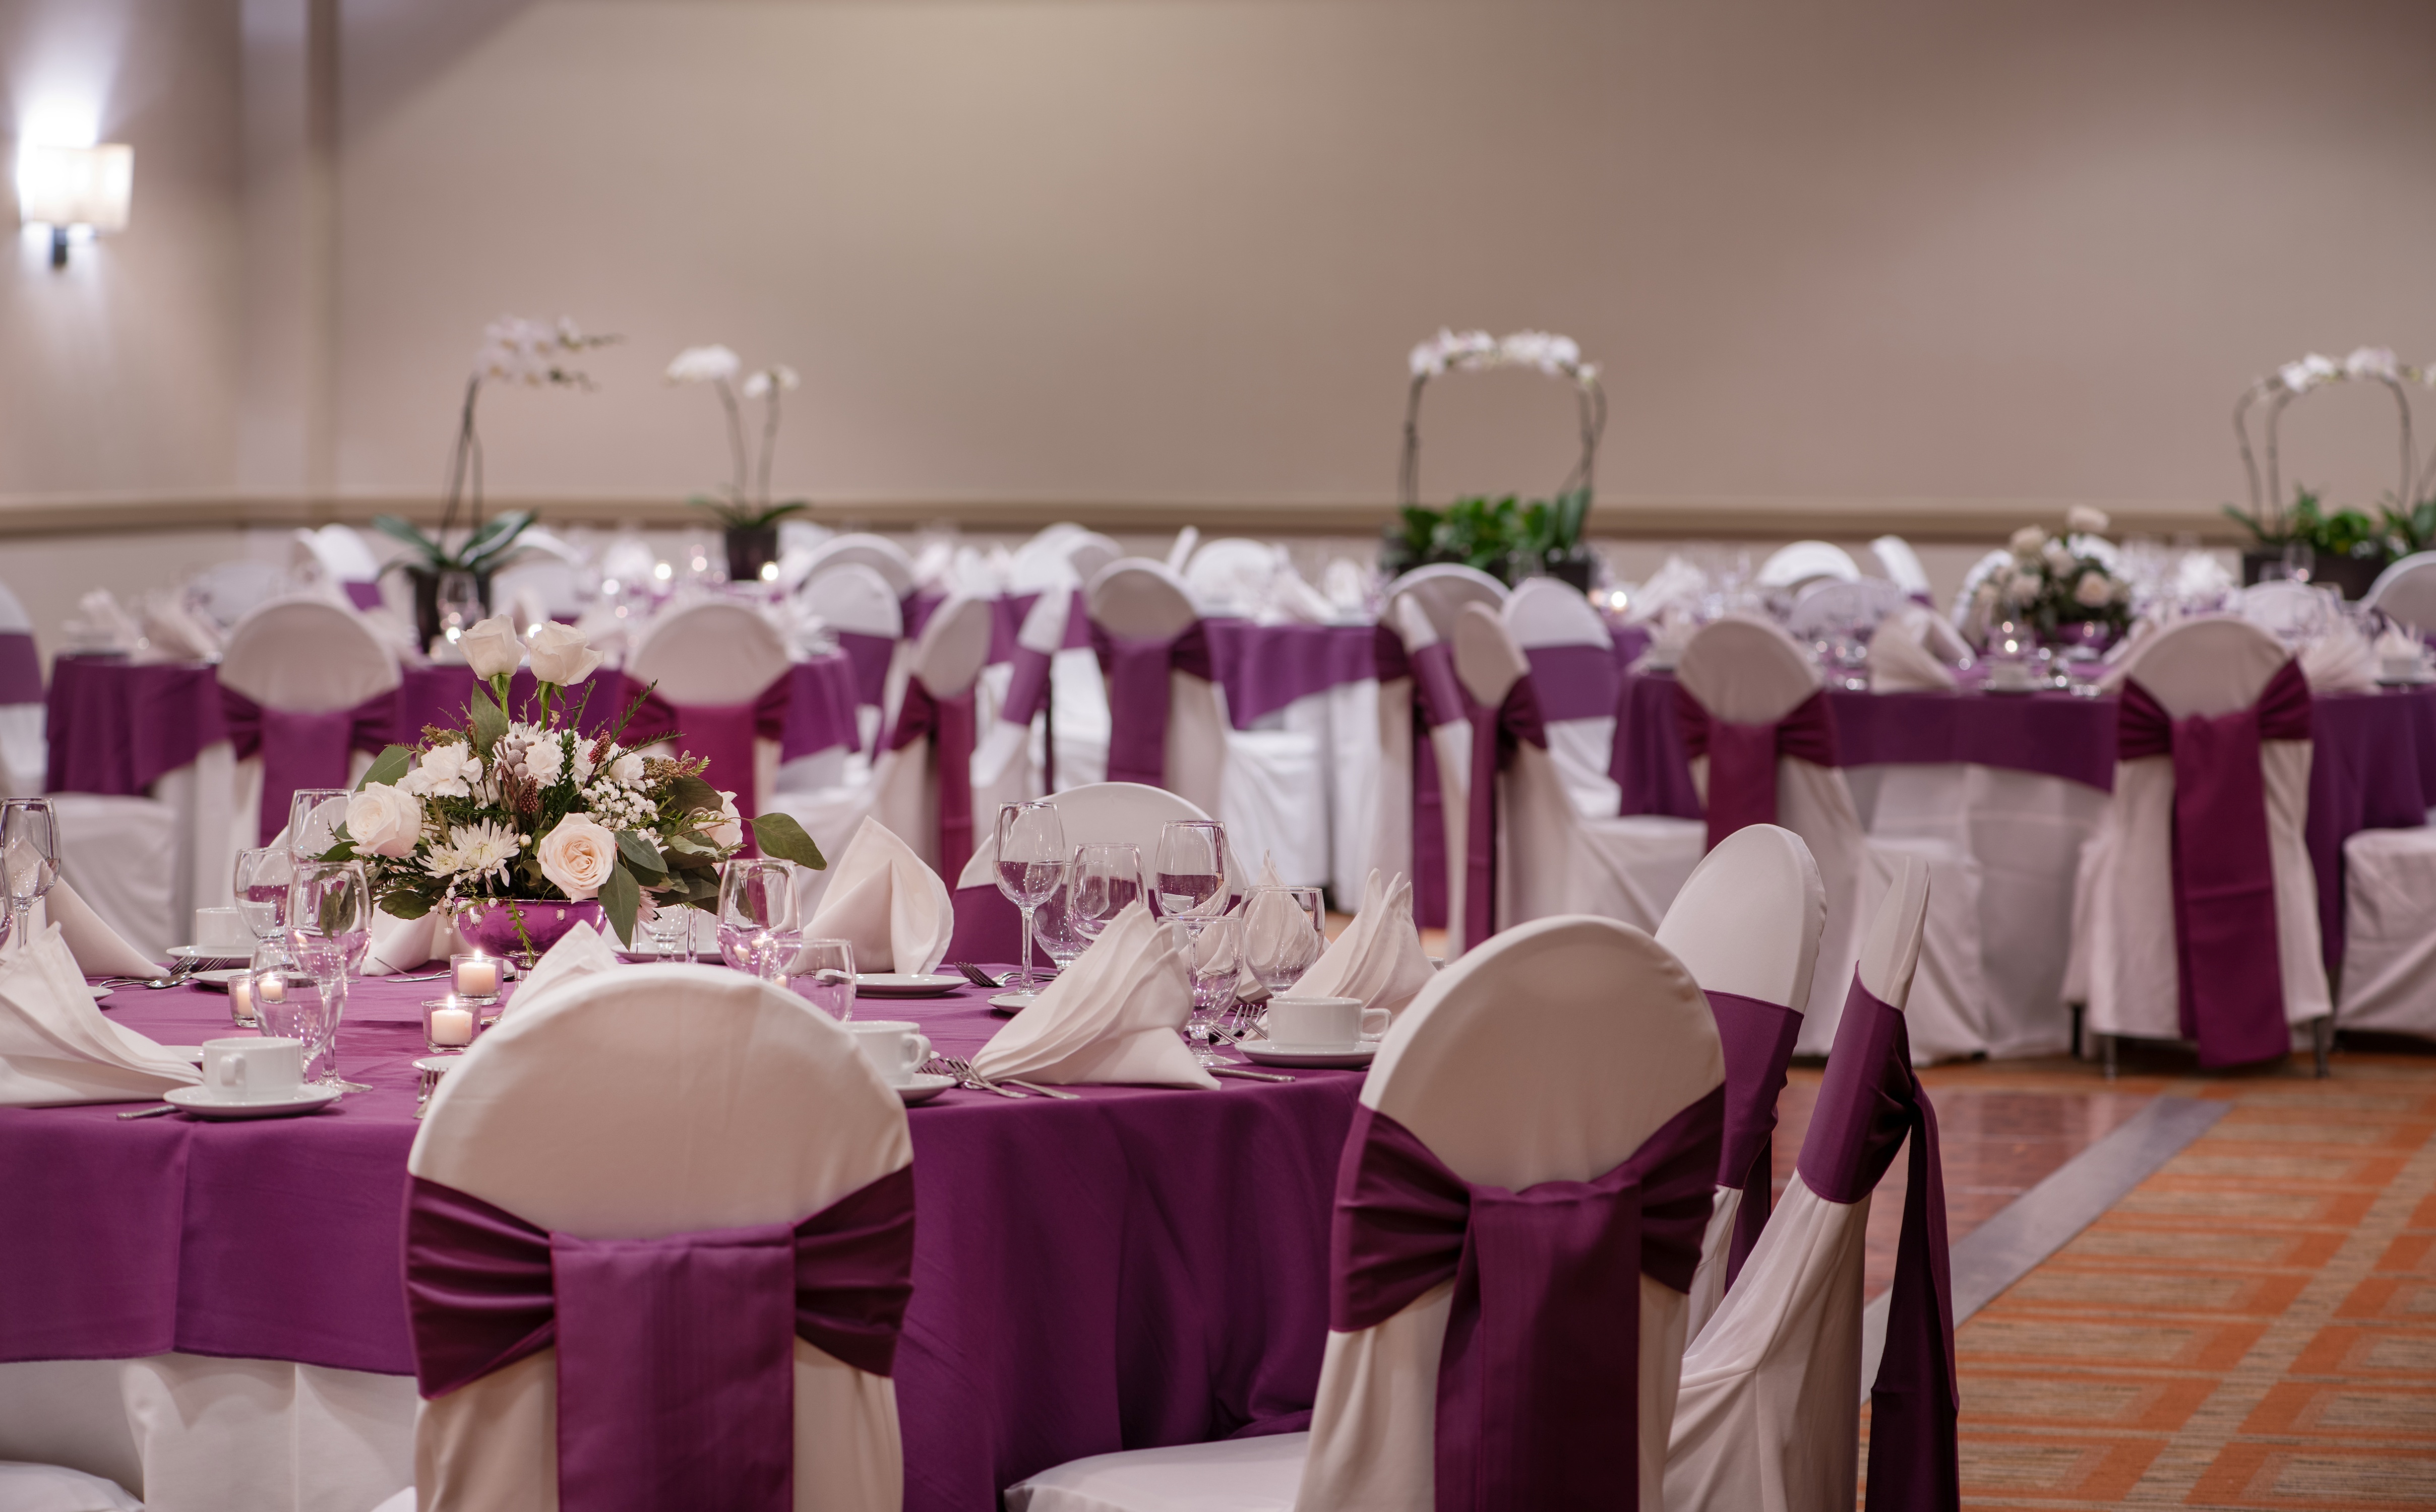 With more than 8,000 sq ft, we can accommodate all social events including weddings and parties.